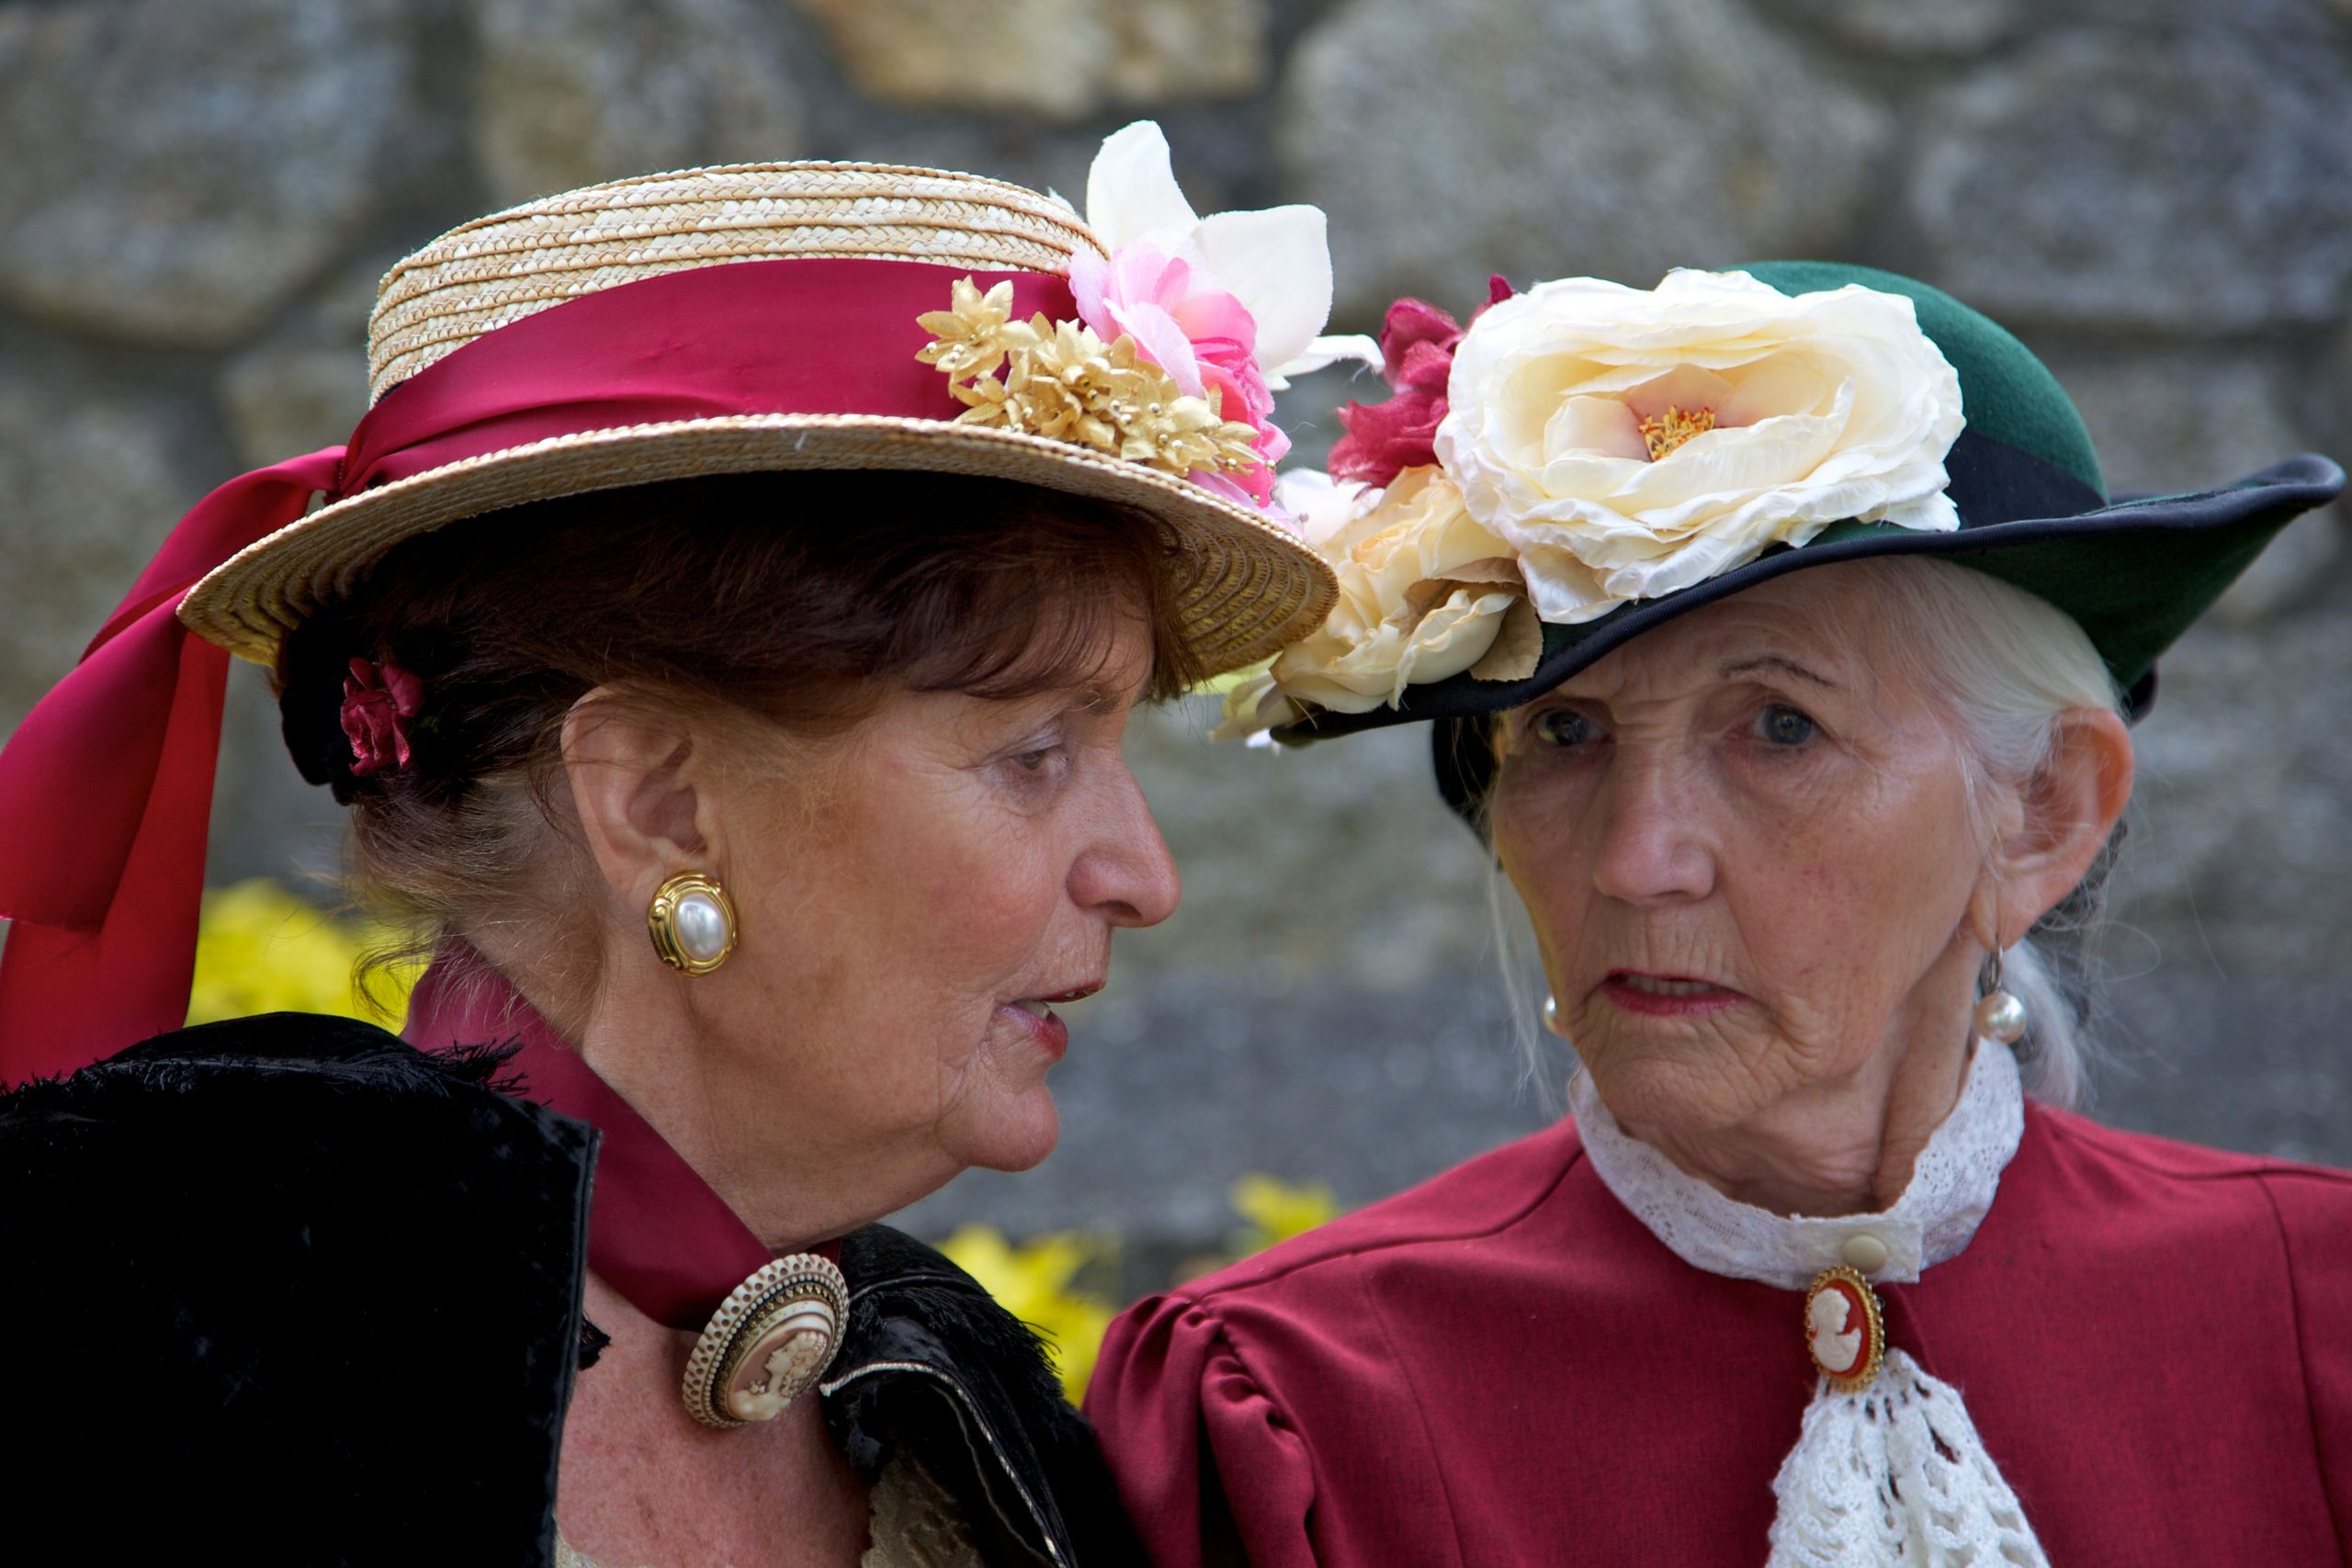 Actors dressed up for Bloomsday Guided Literary Walk at Dalkey Castle & Heritage Centre, Dalkey, Dublin, Ireland